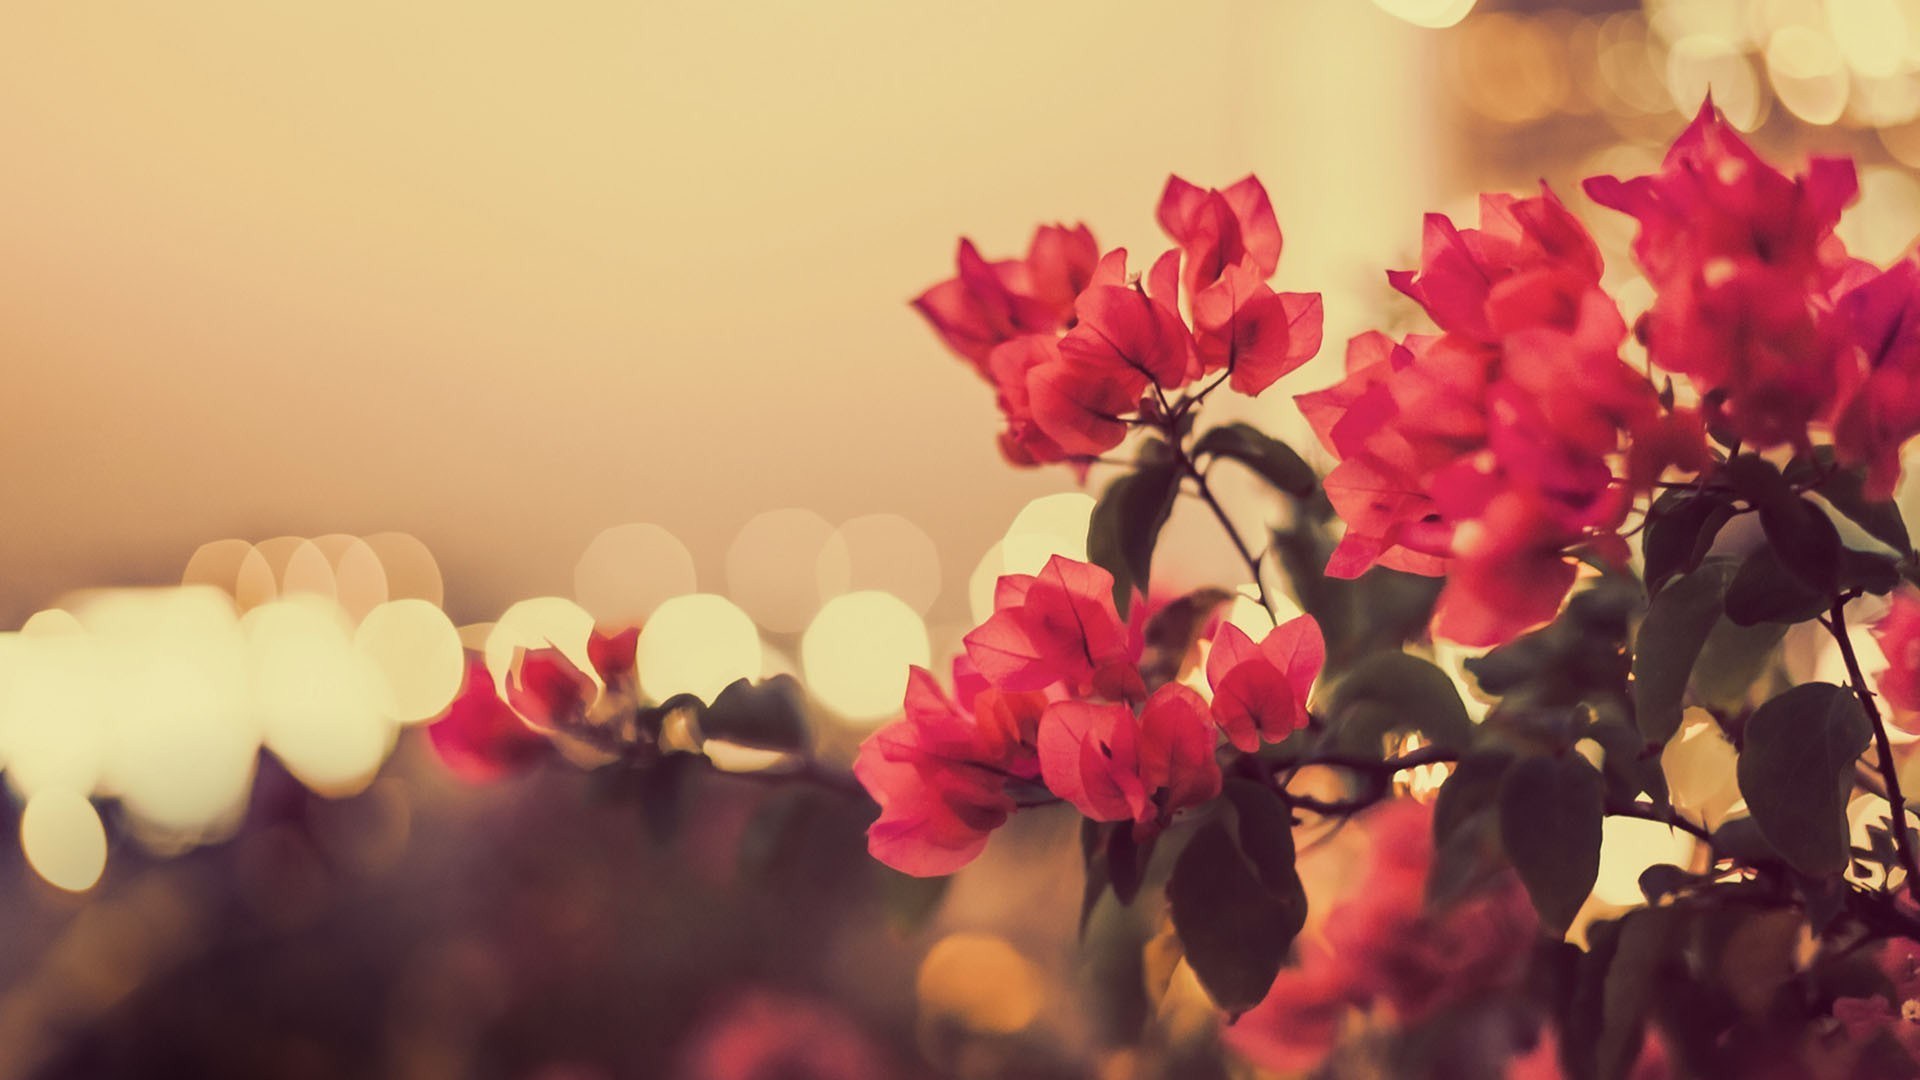 New Vintage Flowers Photos View 913190 Wallpapers RiseWLP